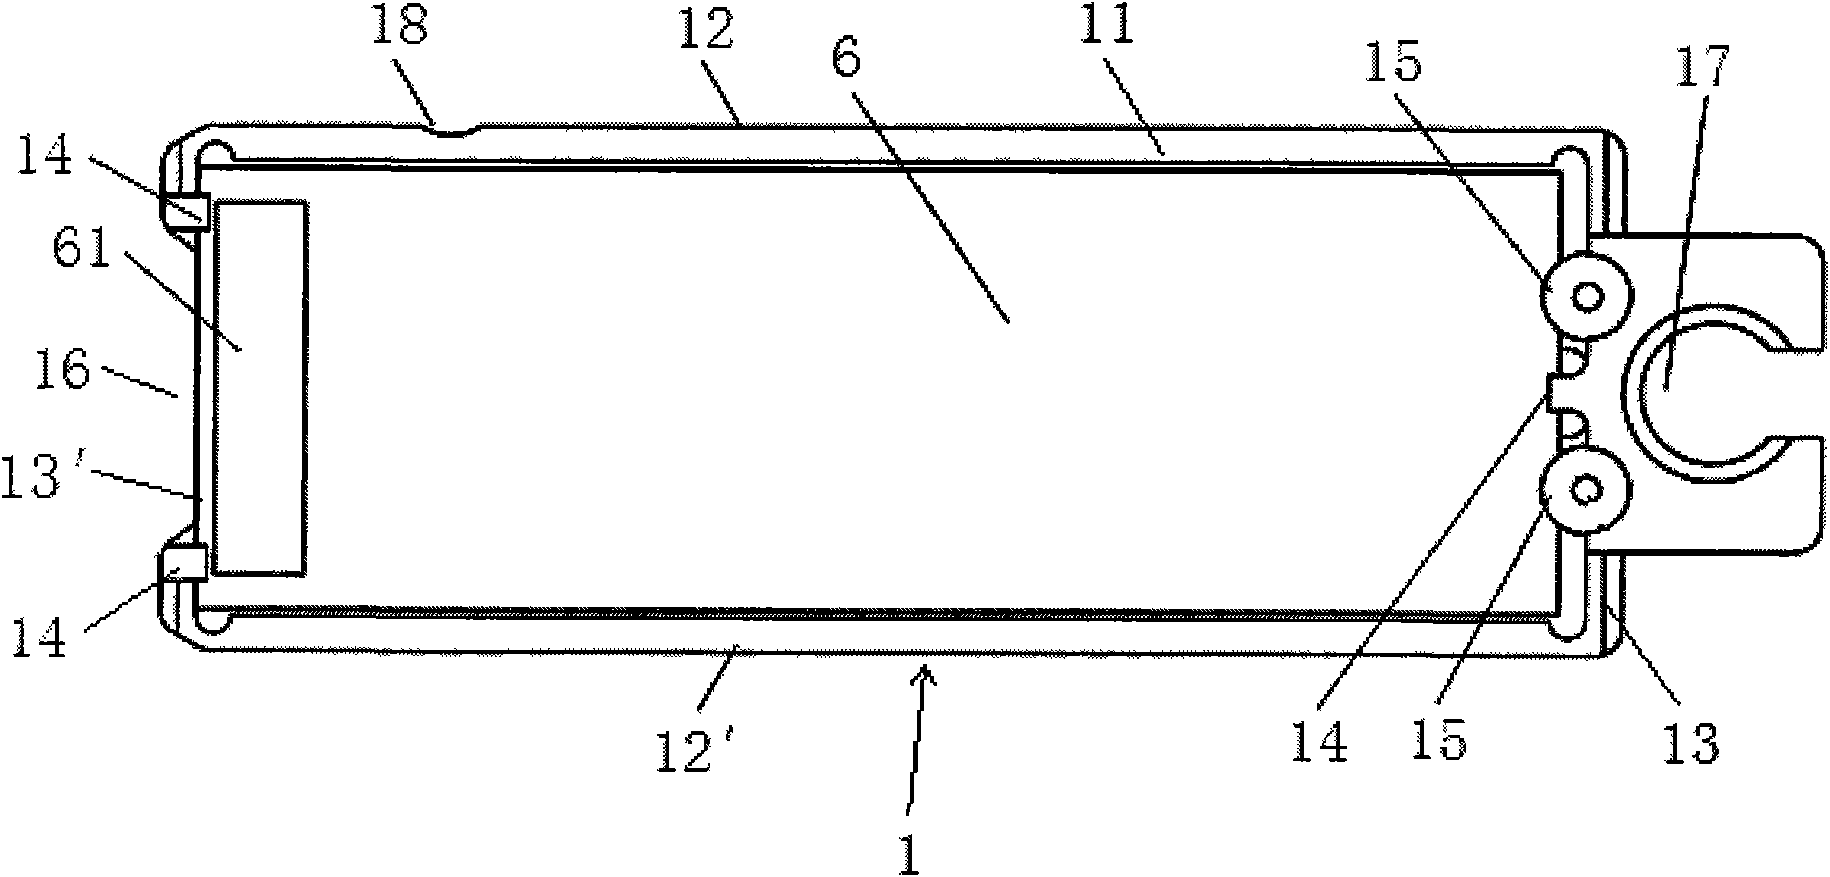 Chip automatic loading device of microarray chip scanner